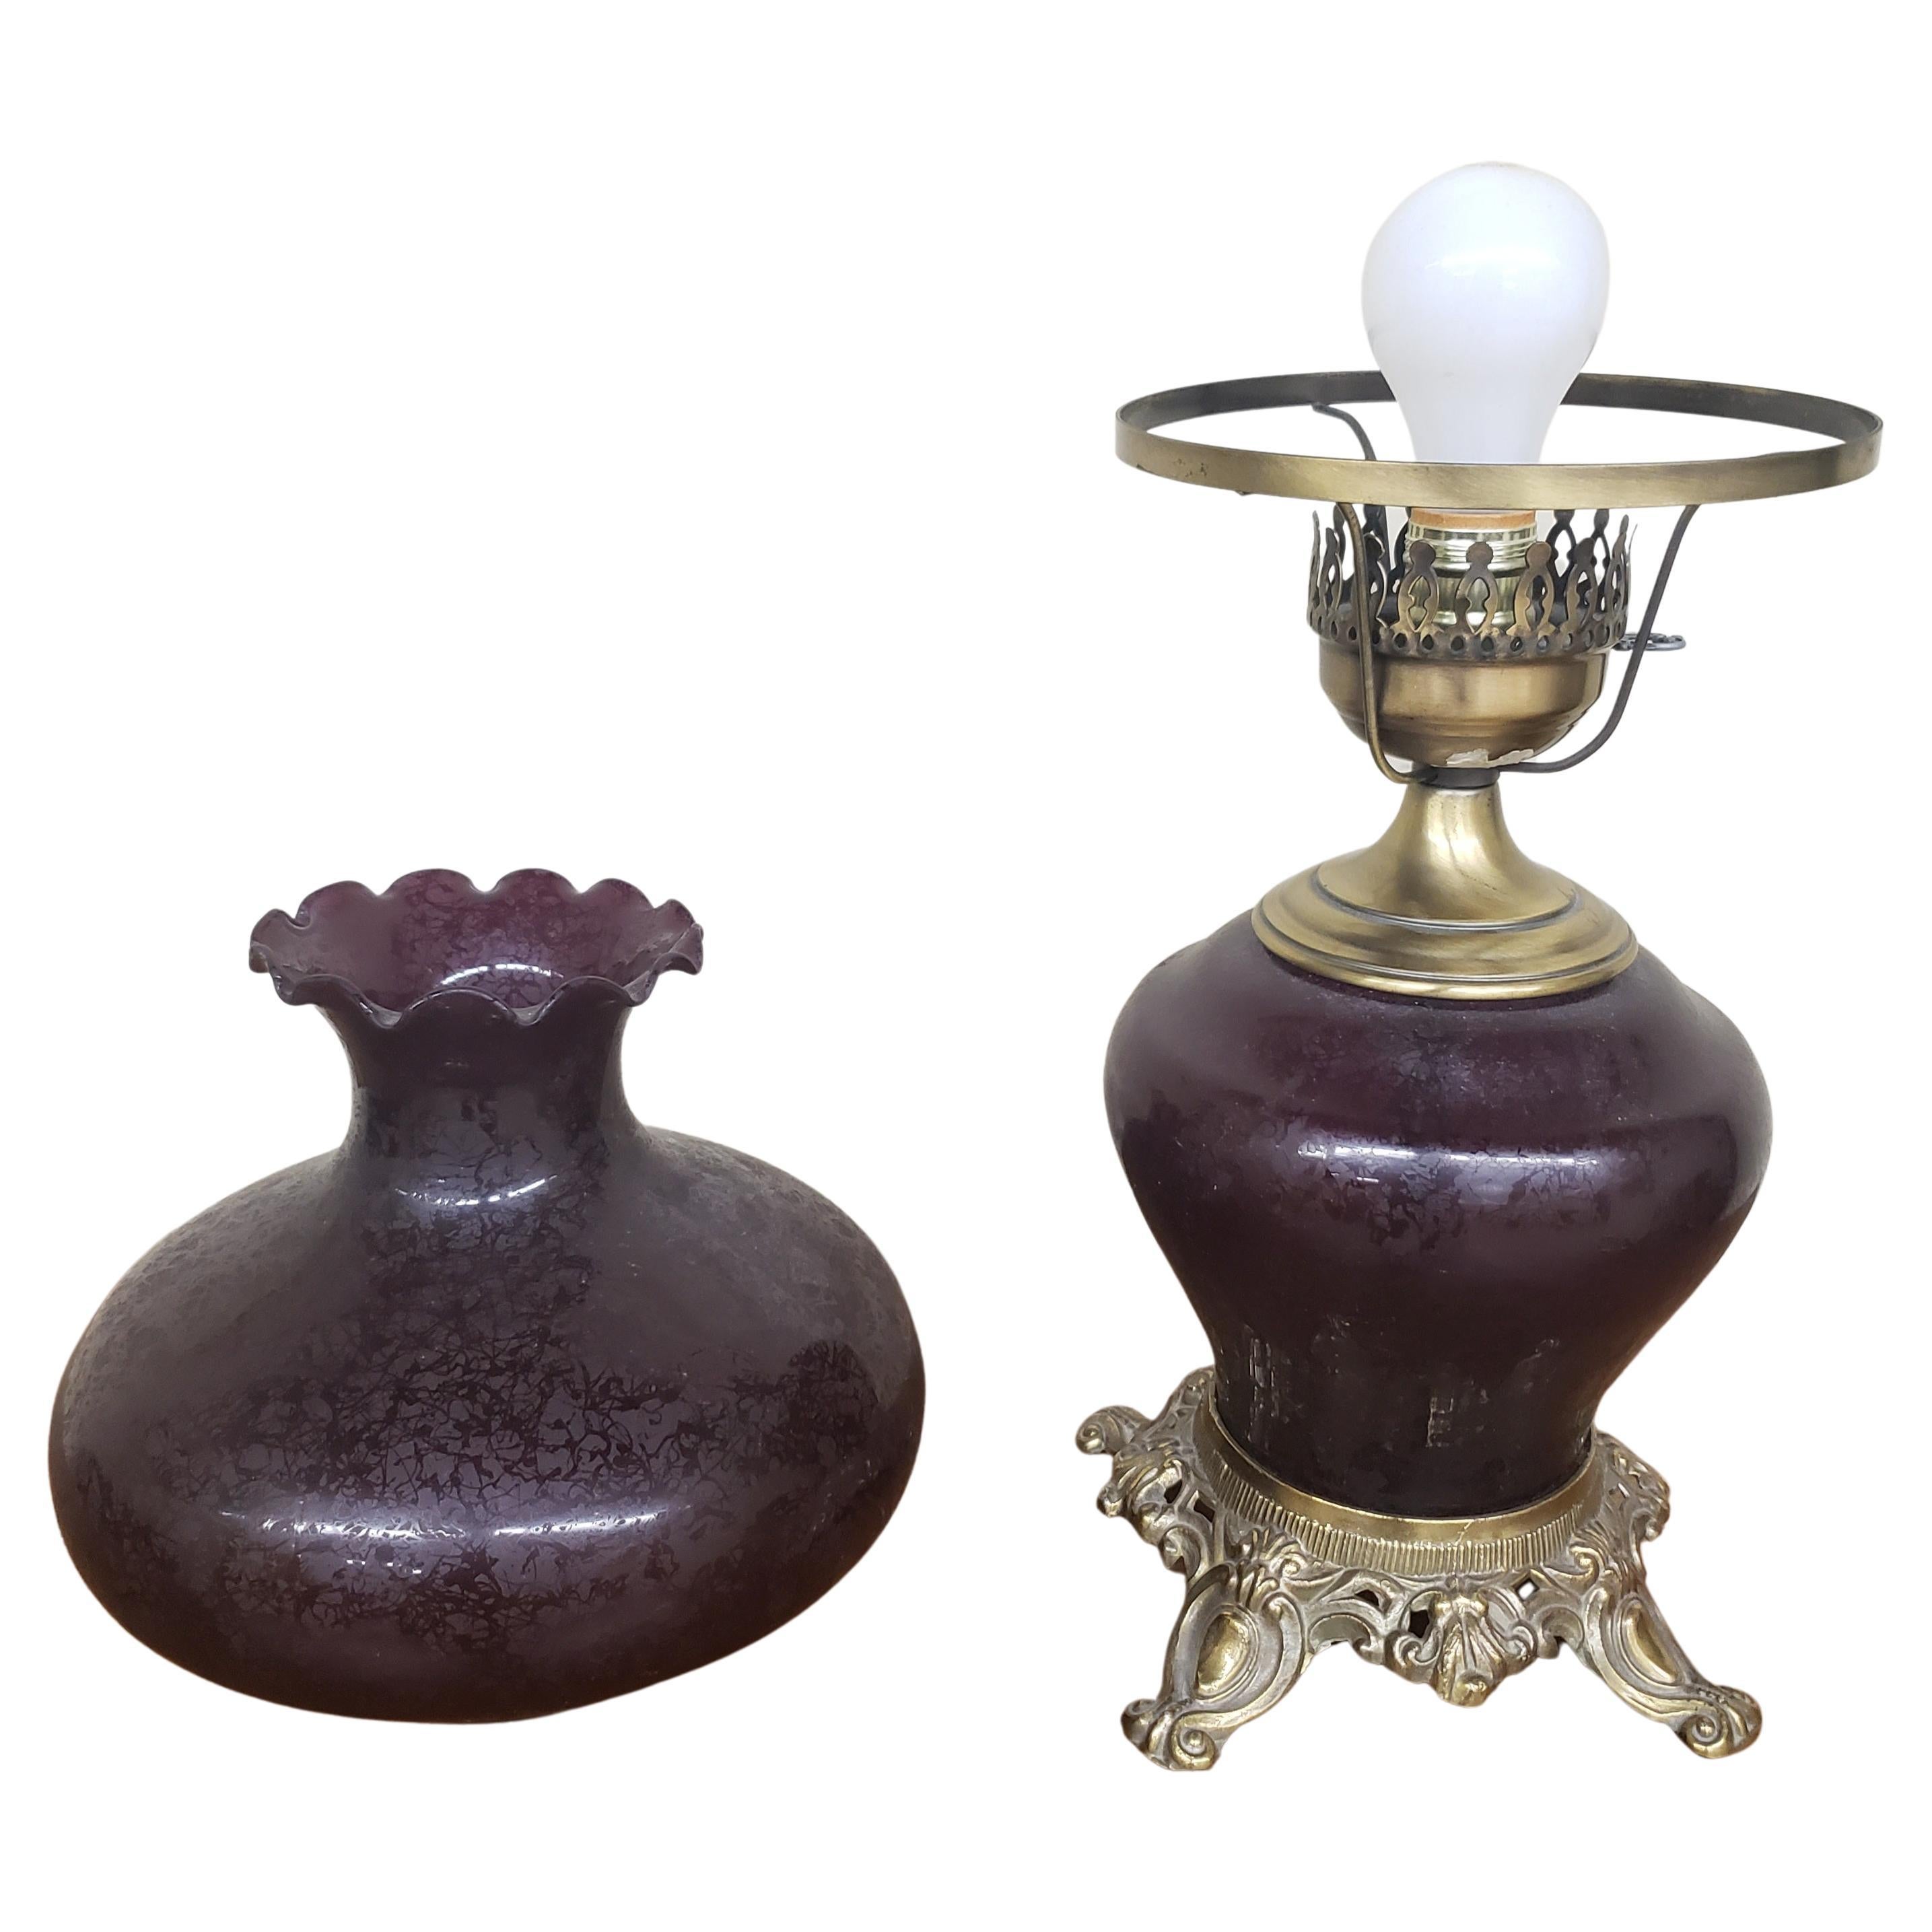 Cranberry glass Parlor lamp with solid brass base.